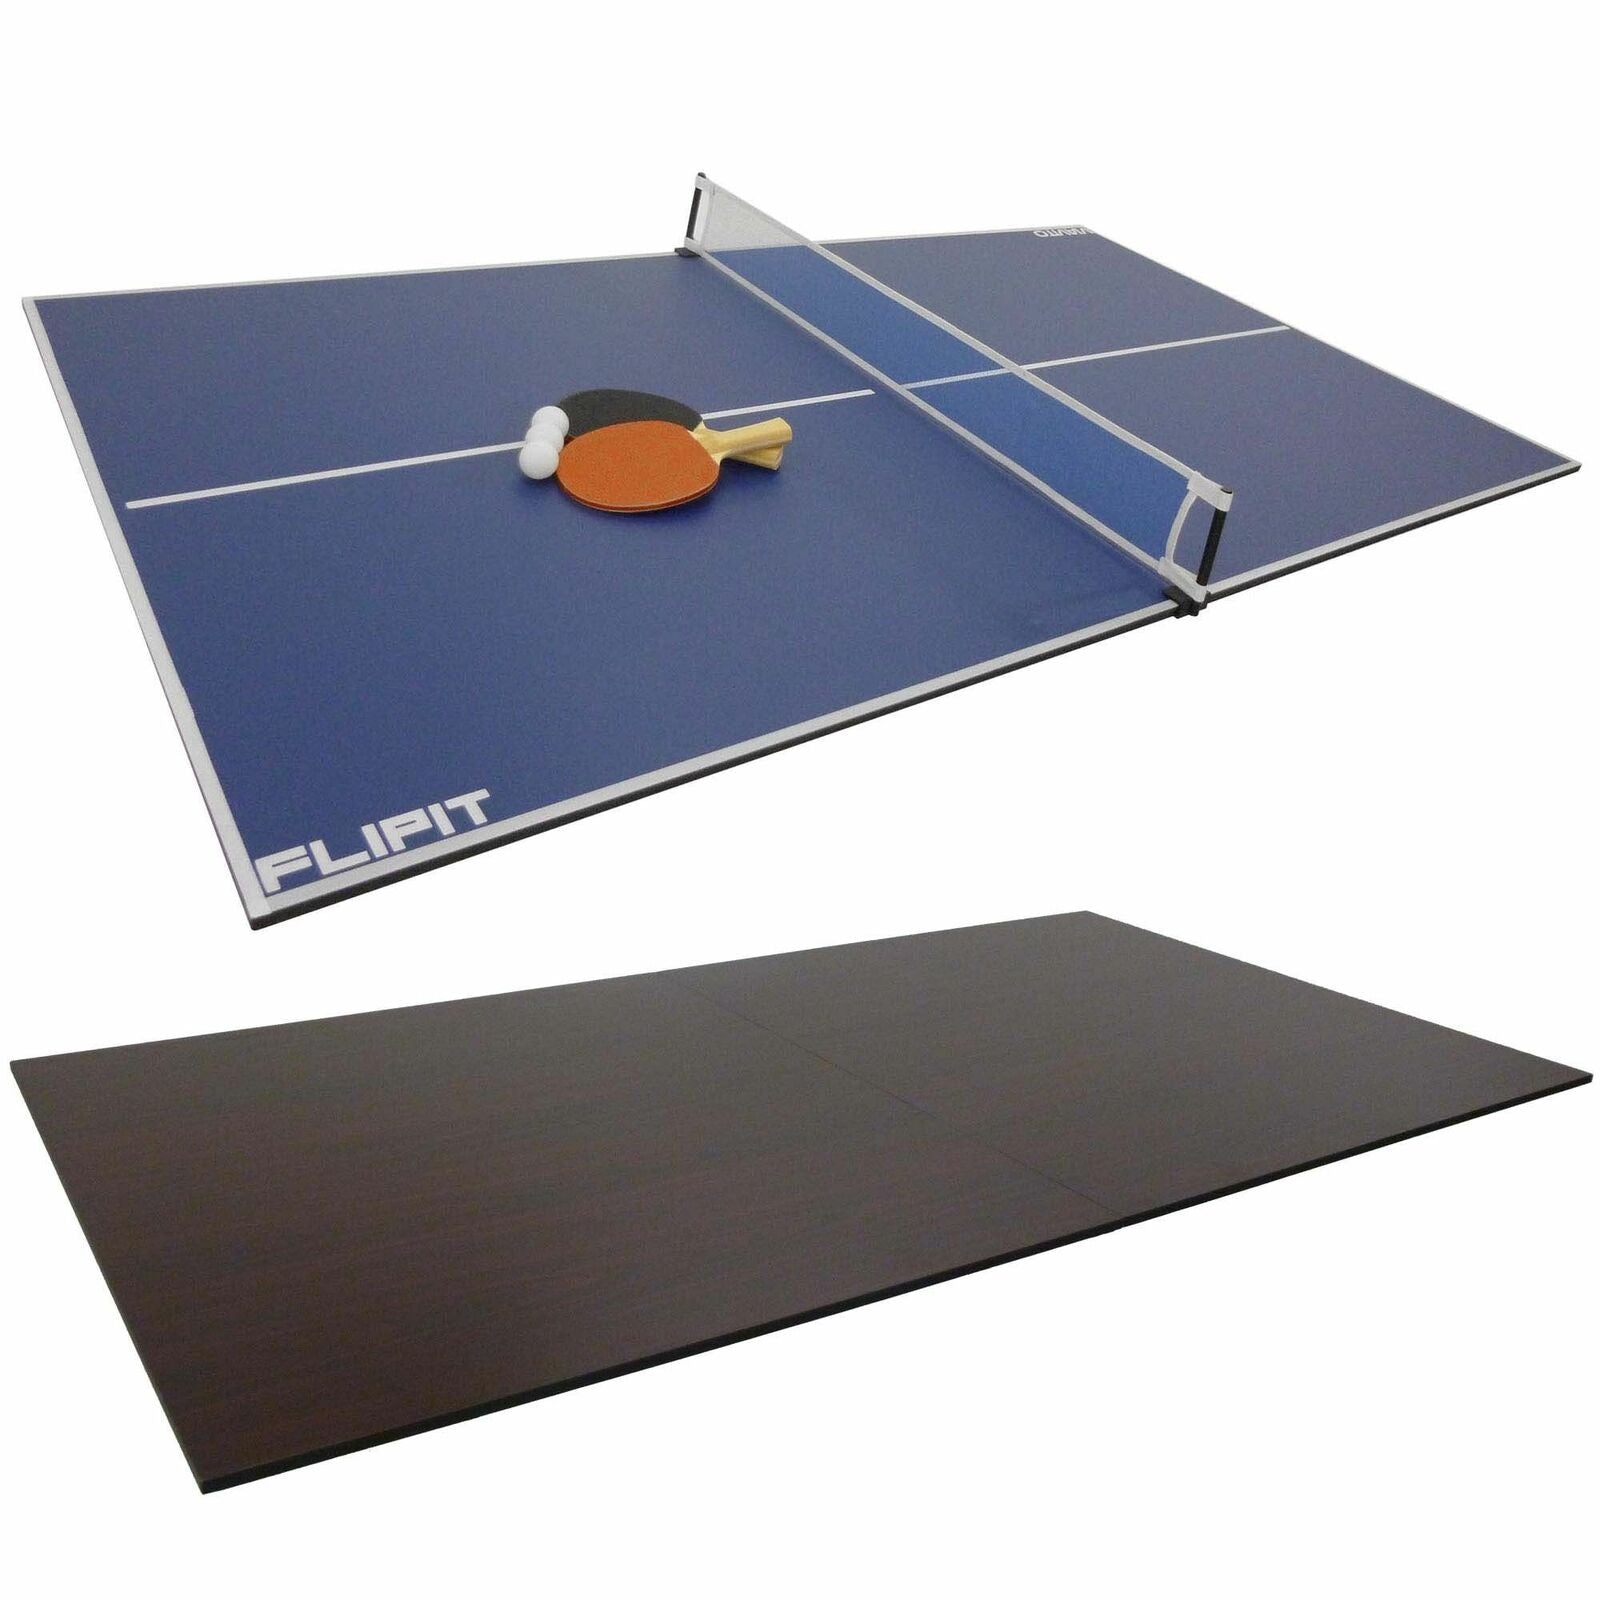 6ft Reversible Table Tennis and Dining Table Top – Table Top Sports